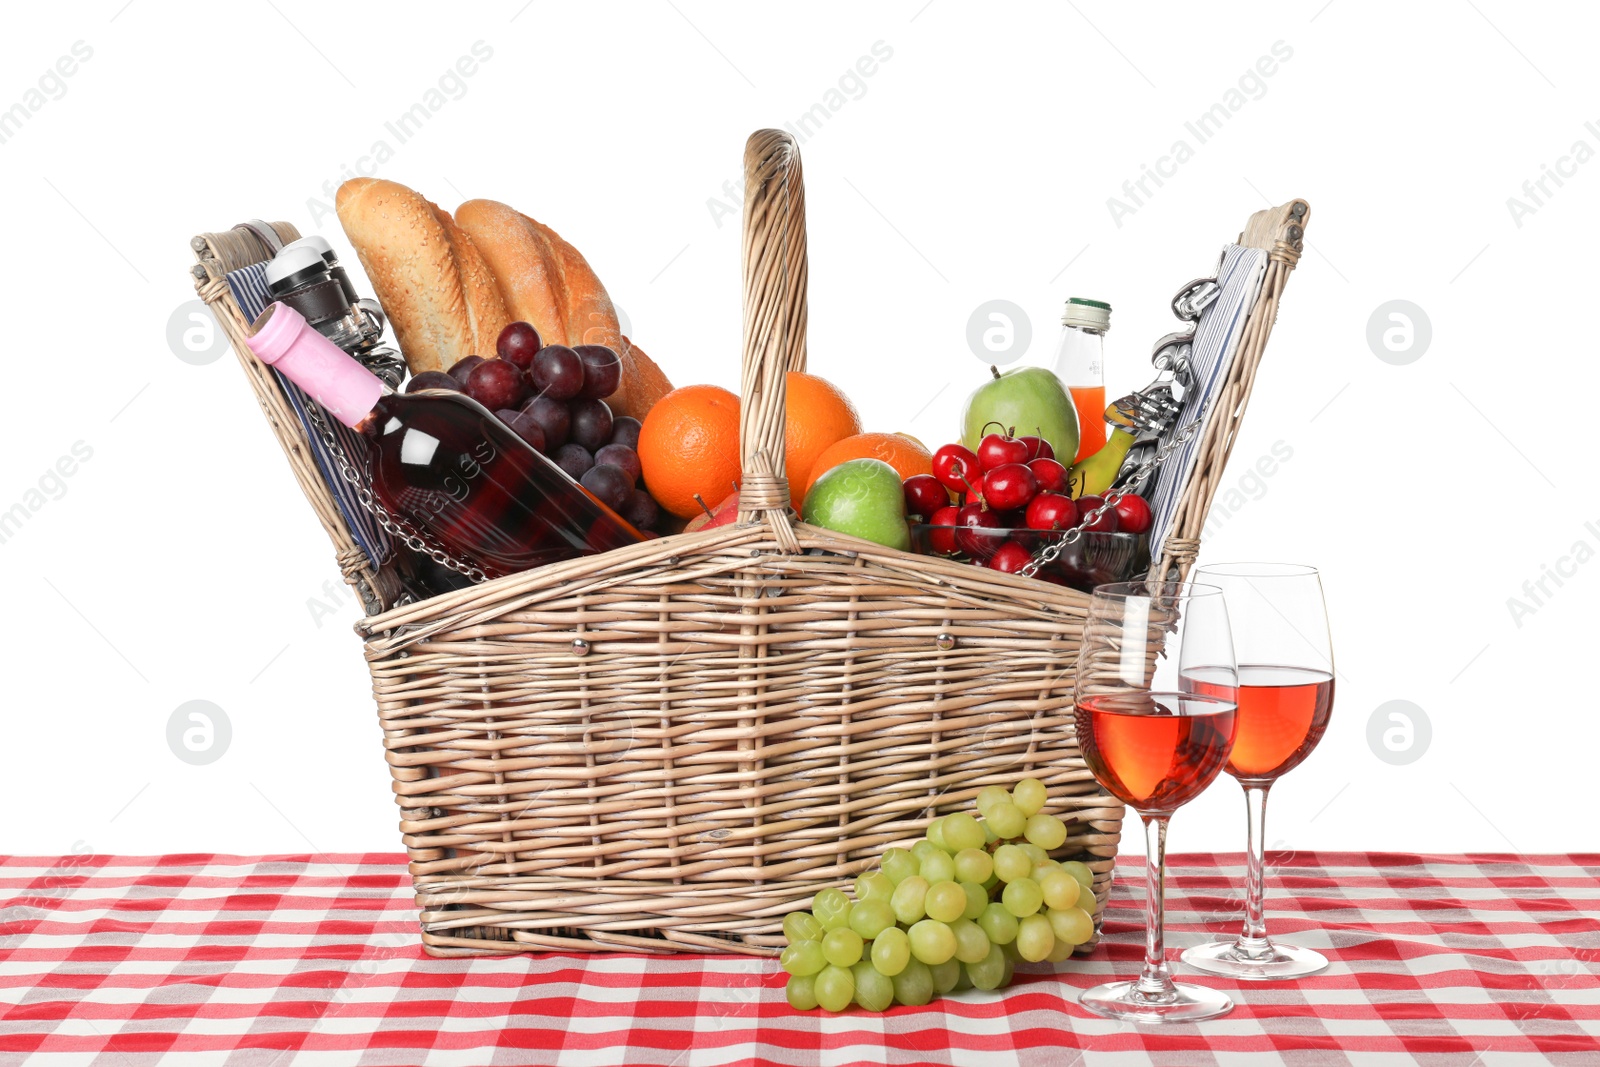 Photo of Wicker picnic basket with different products on checkered tablecloth against white background